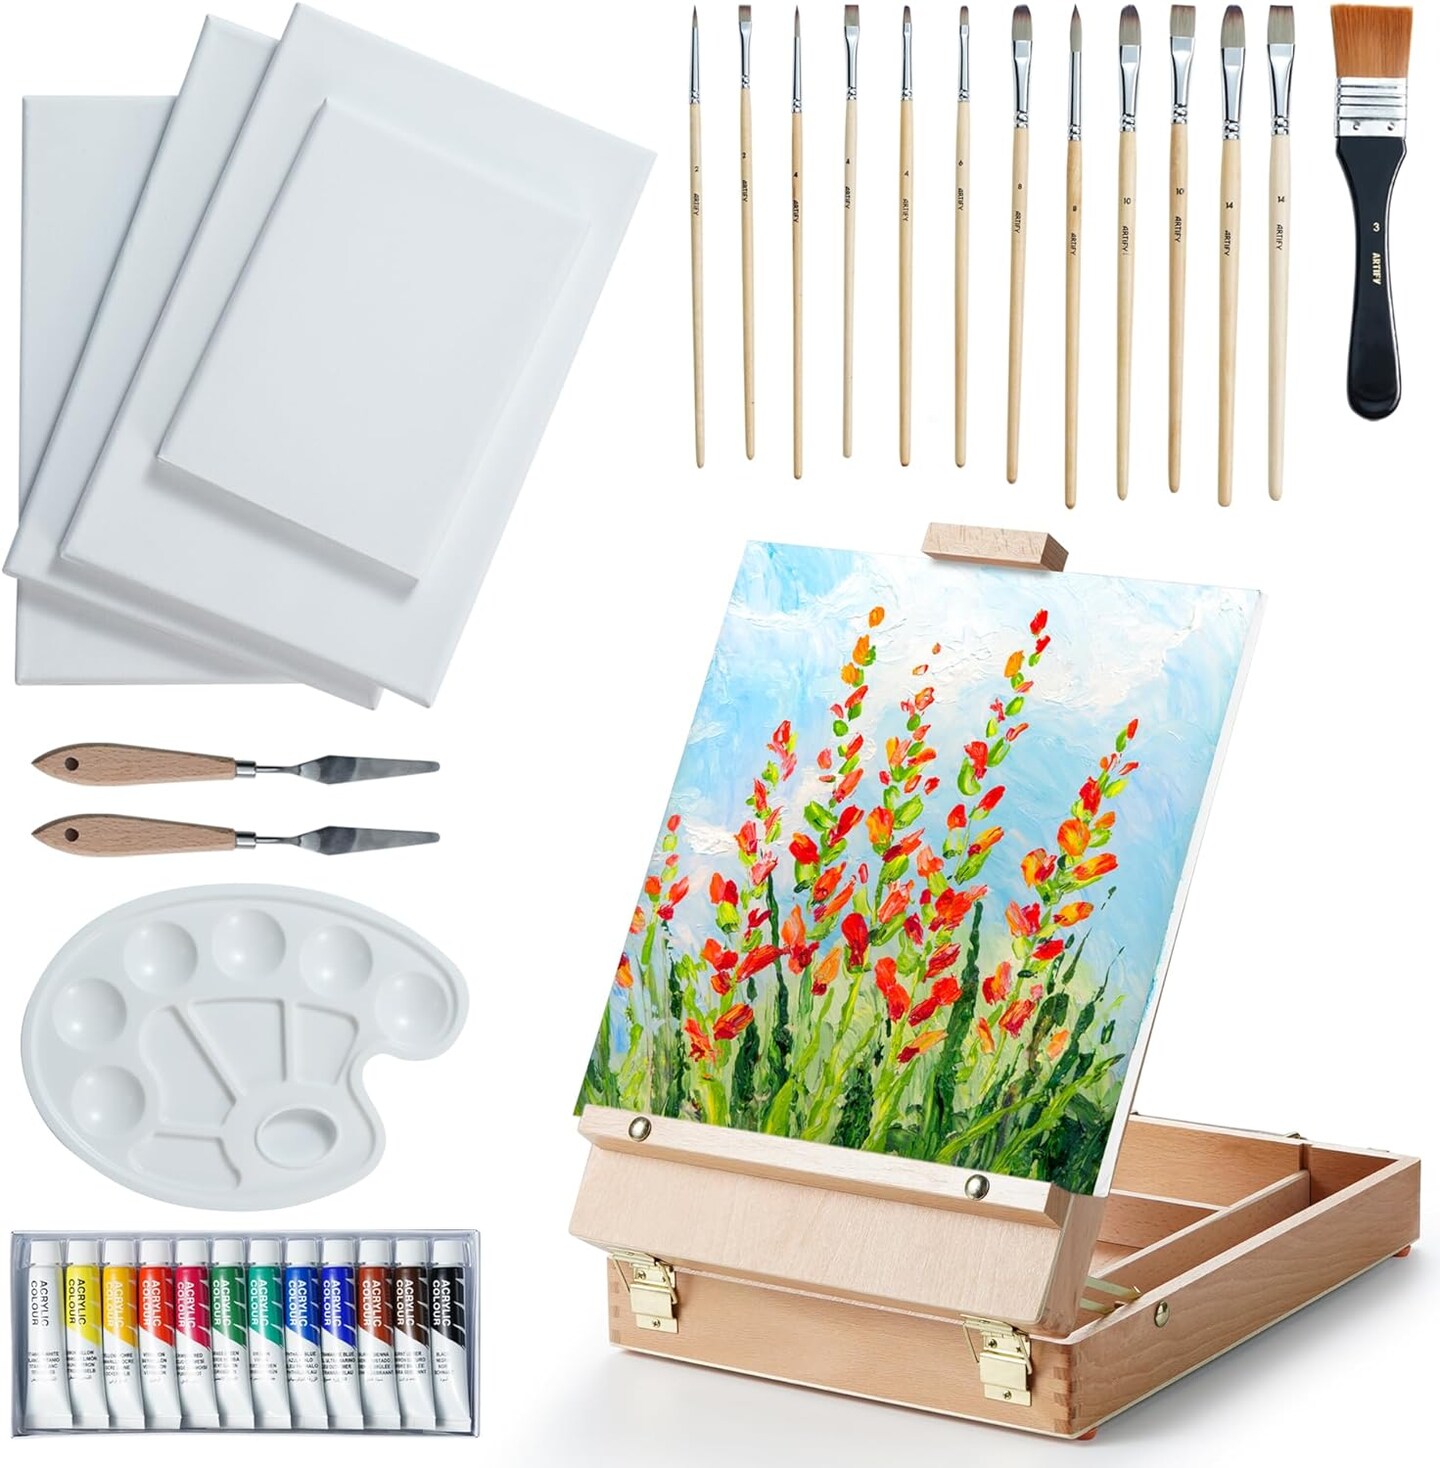 ARTIFY Table Sketch Box Easel Set, Desktop Artist Easel with 12 Colors Acrylic Paints, 13pcs Brushes, 4 Canvas Boards, Plastic Palette and 2 pcs Palette Knives, Gift for Artists, Kids, Adults